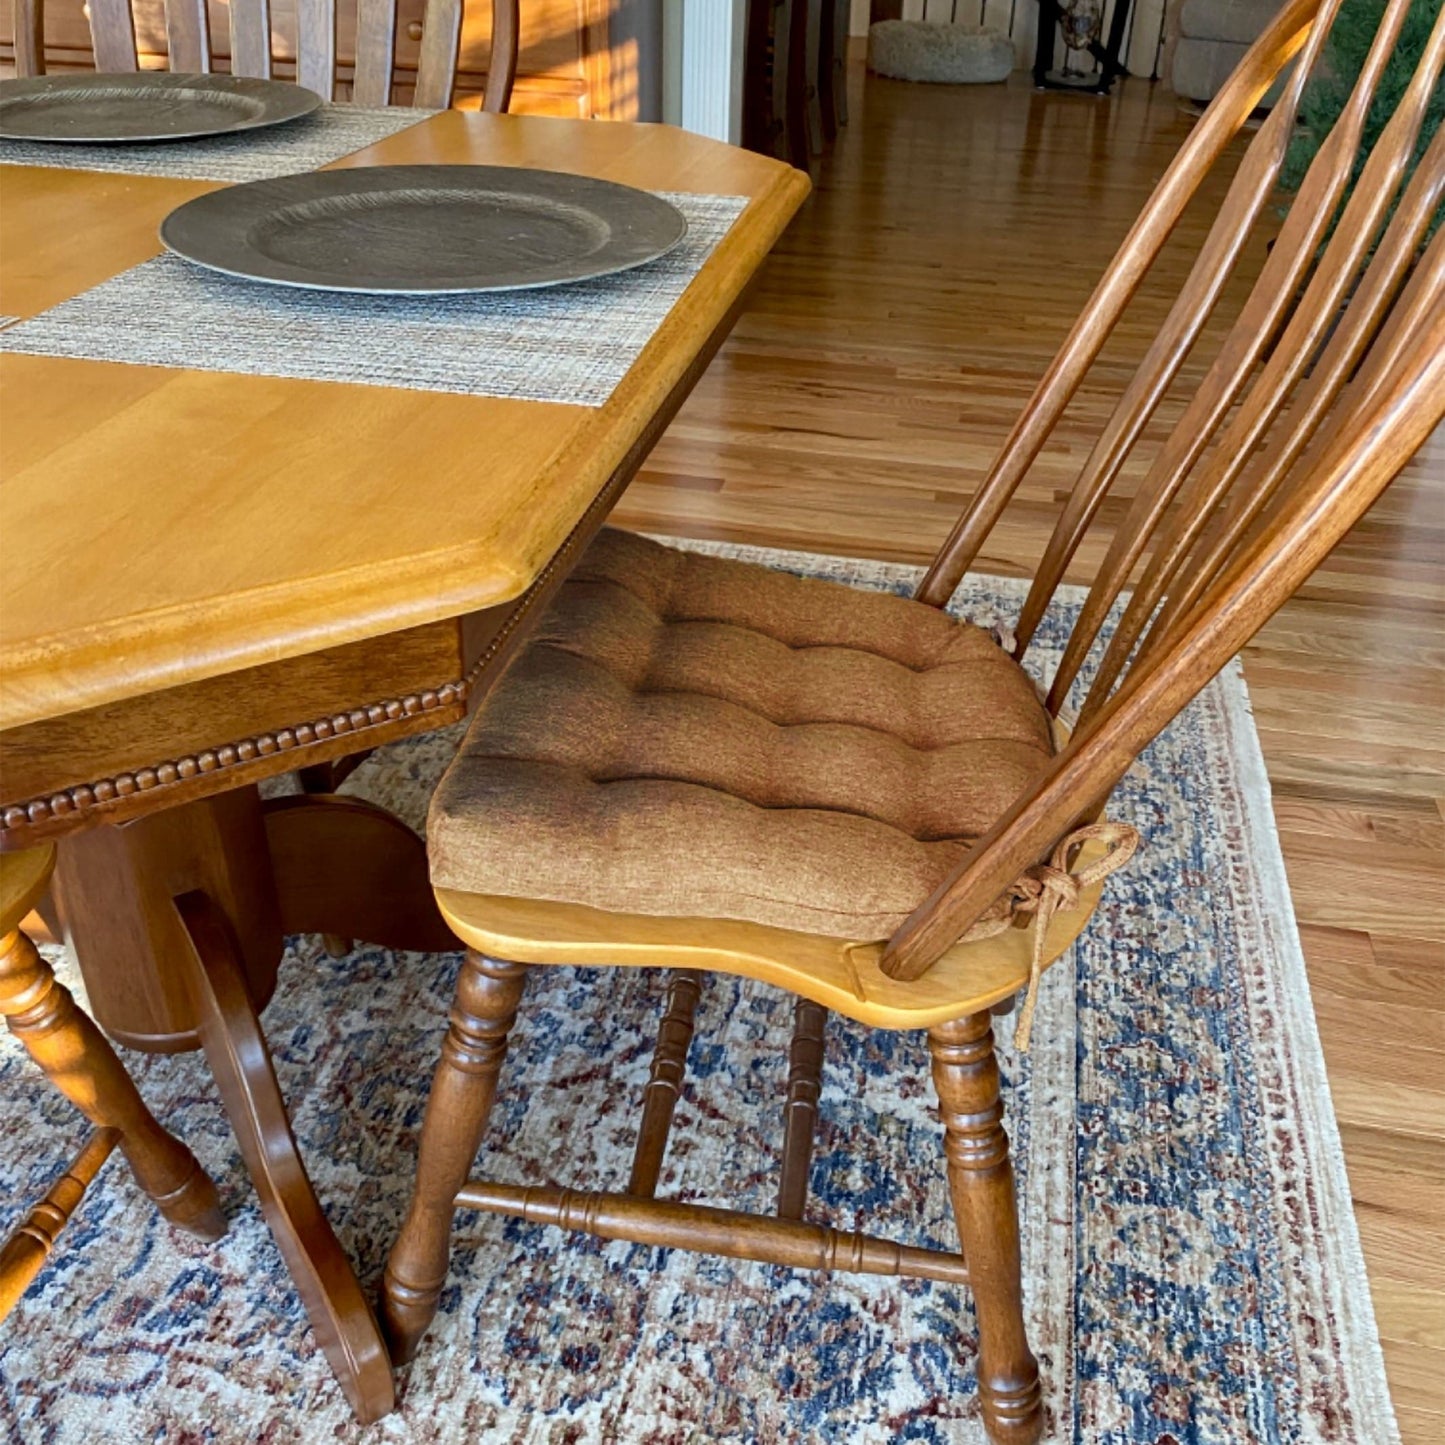 copper colored dining room chair cushions on wooden windsor chairs in formal dining room